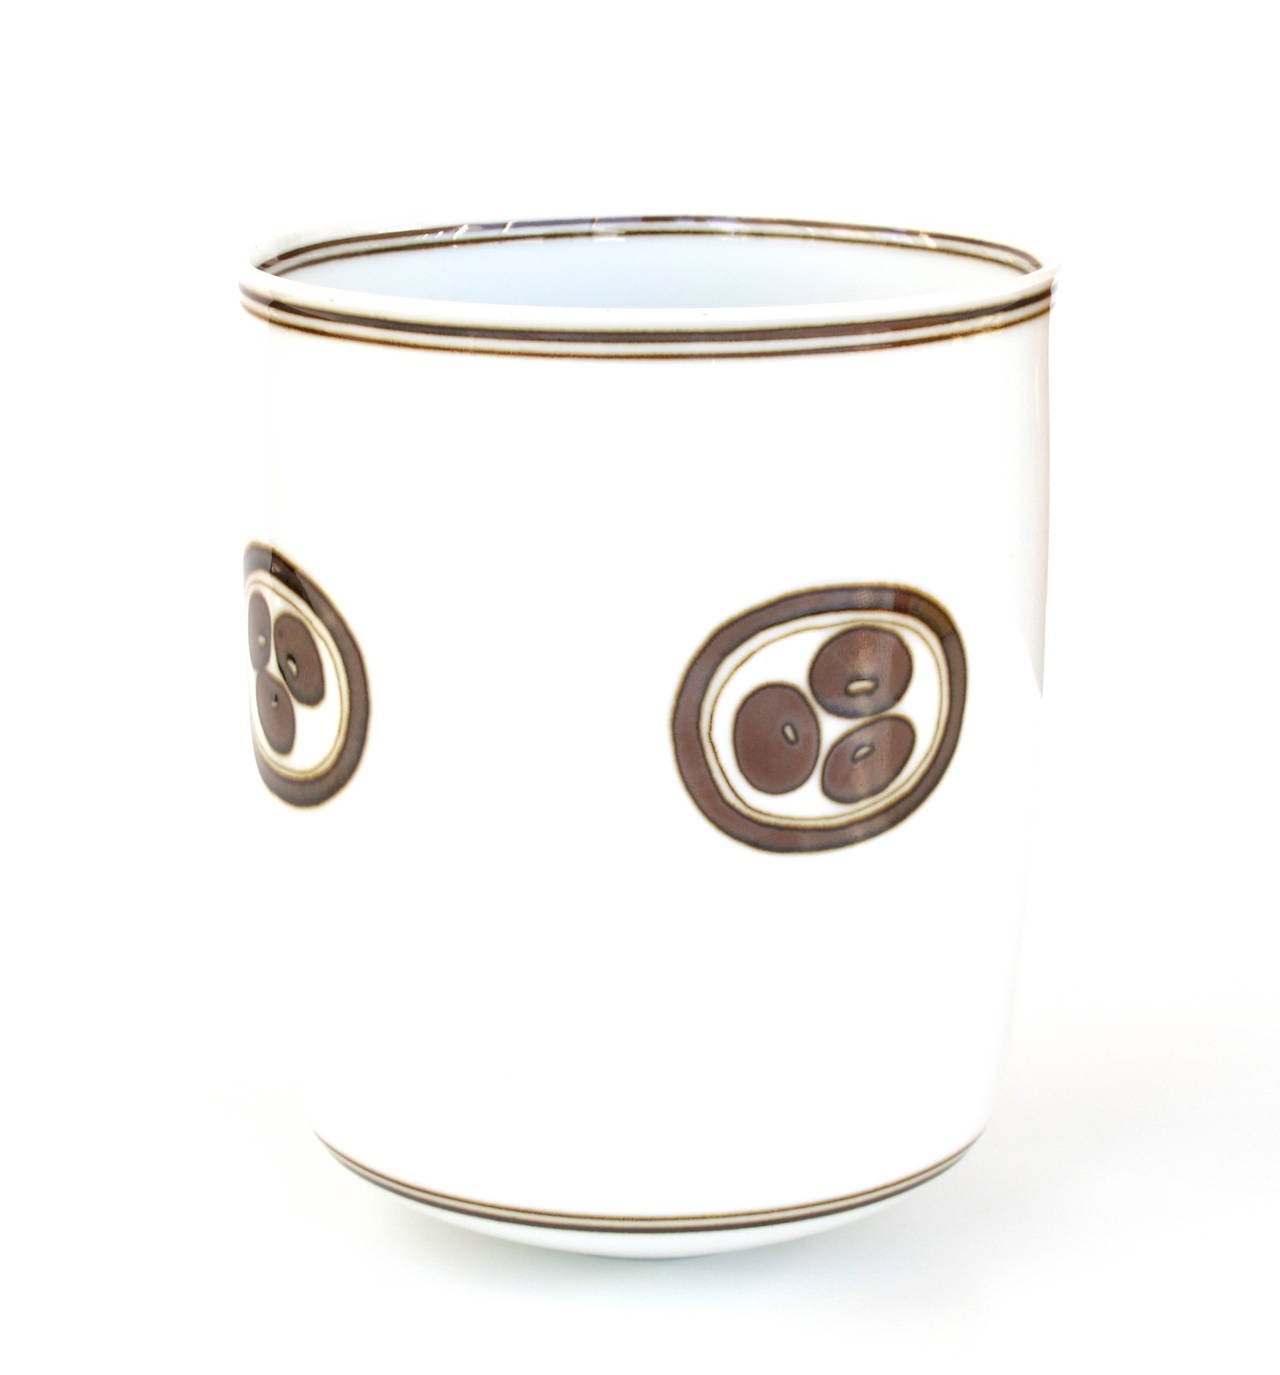 Elegant porcelain pot by Alev Ebüzziya Siesbye (b. 1938) for Rosenthal. The piece is marked on the bottom.

Kunstconsult also offers a complementing bowl and cup.